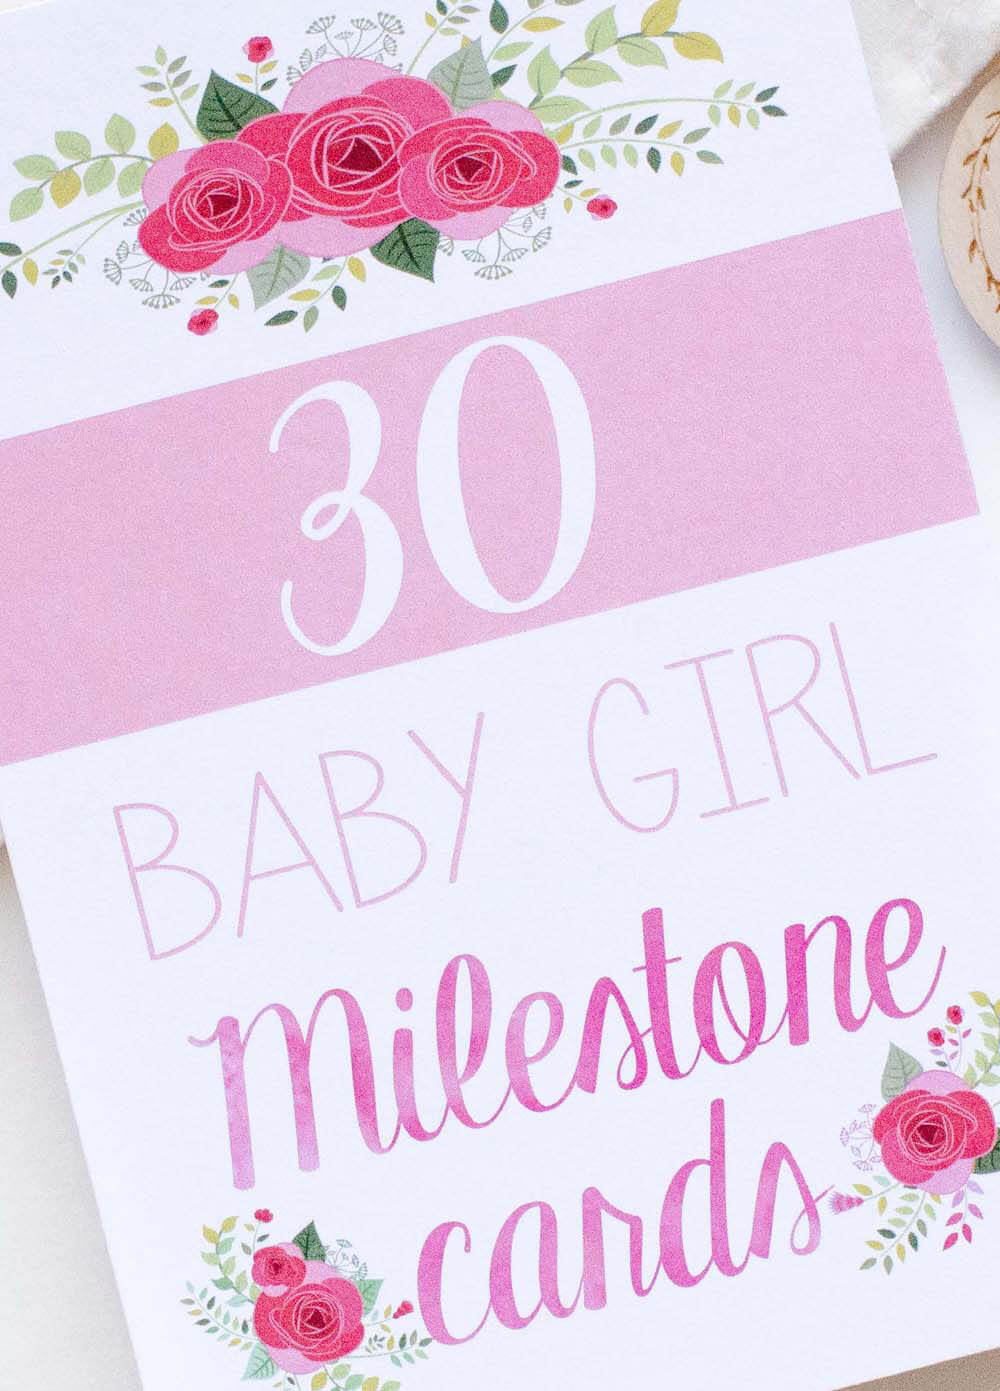 Blossom & Pear - Baby Milestone Cards in Floral